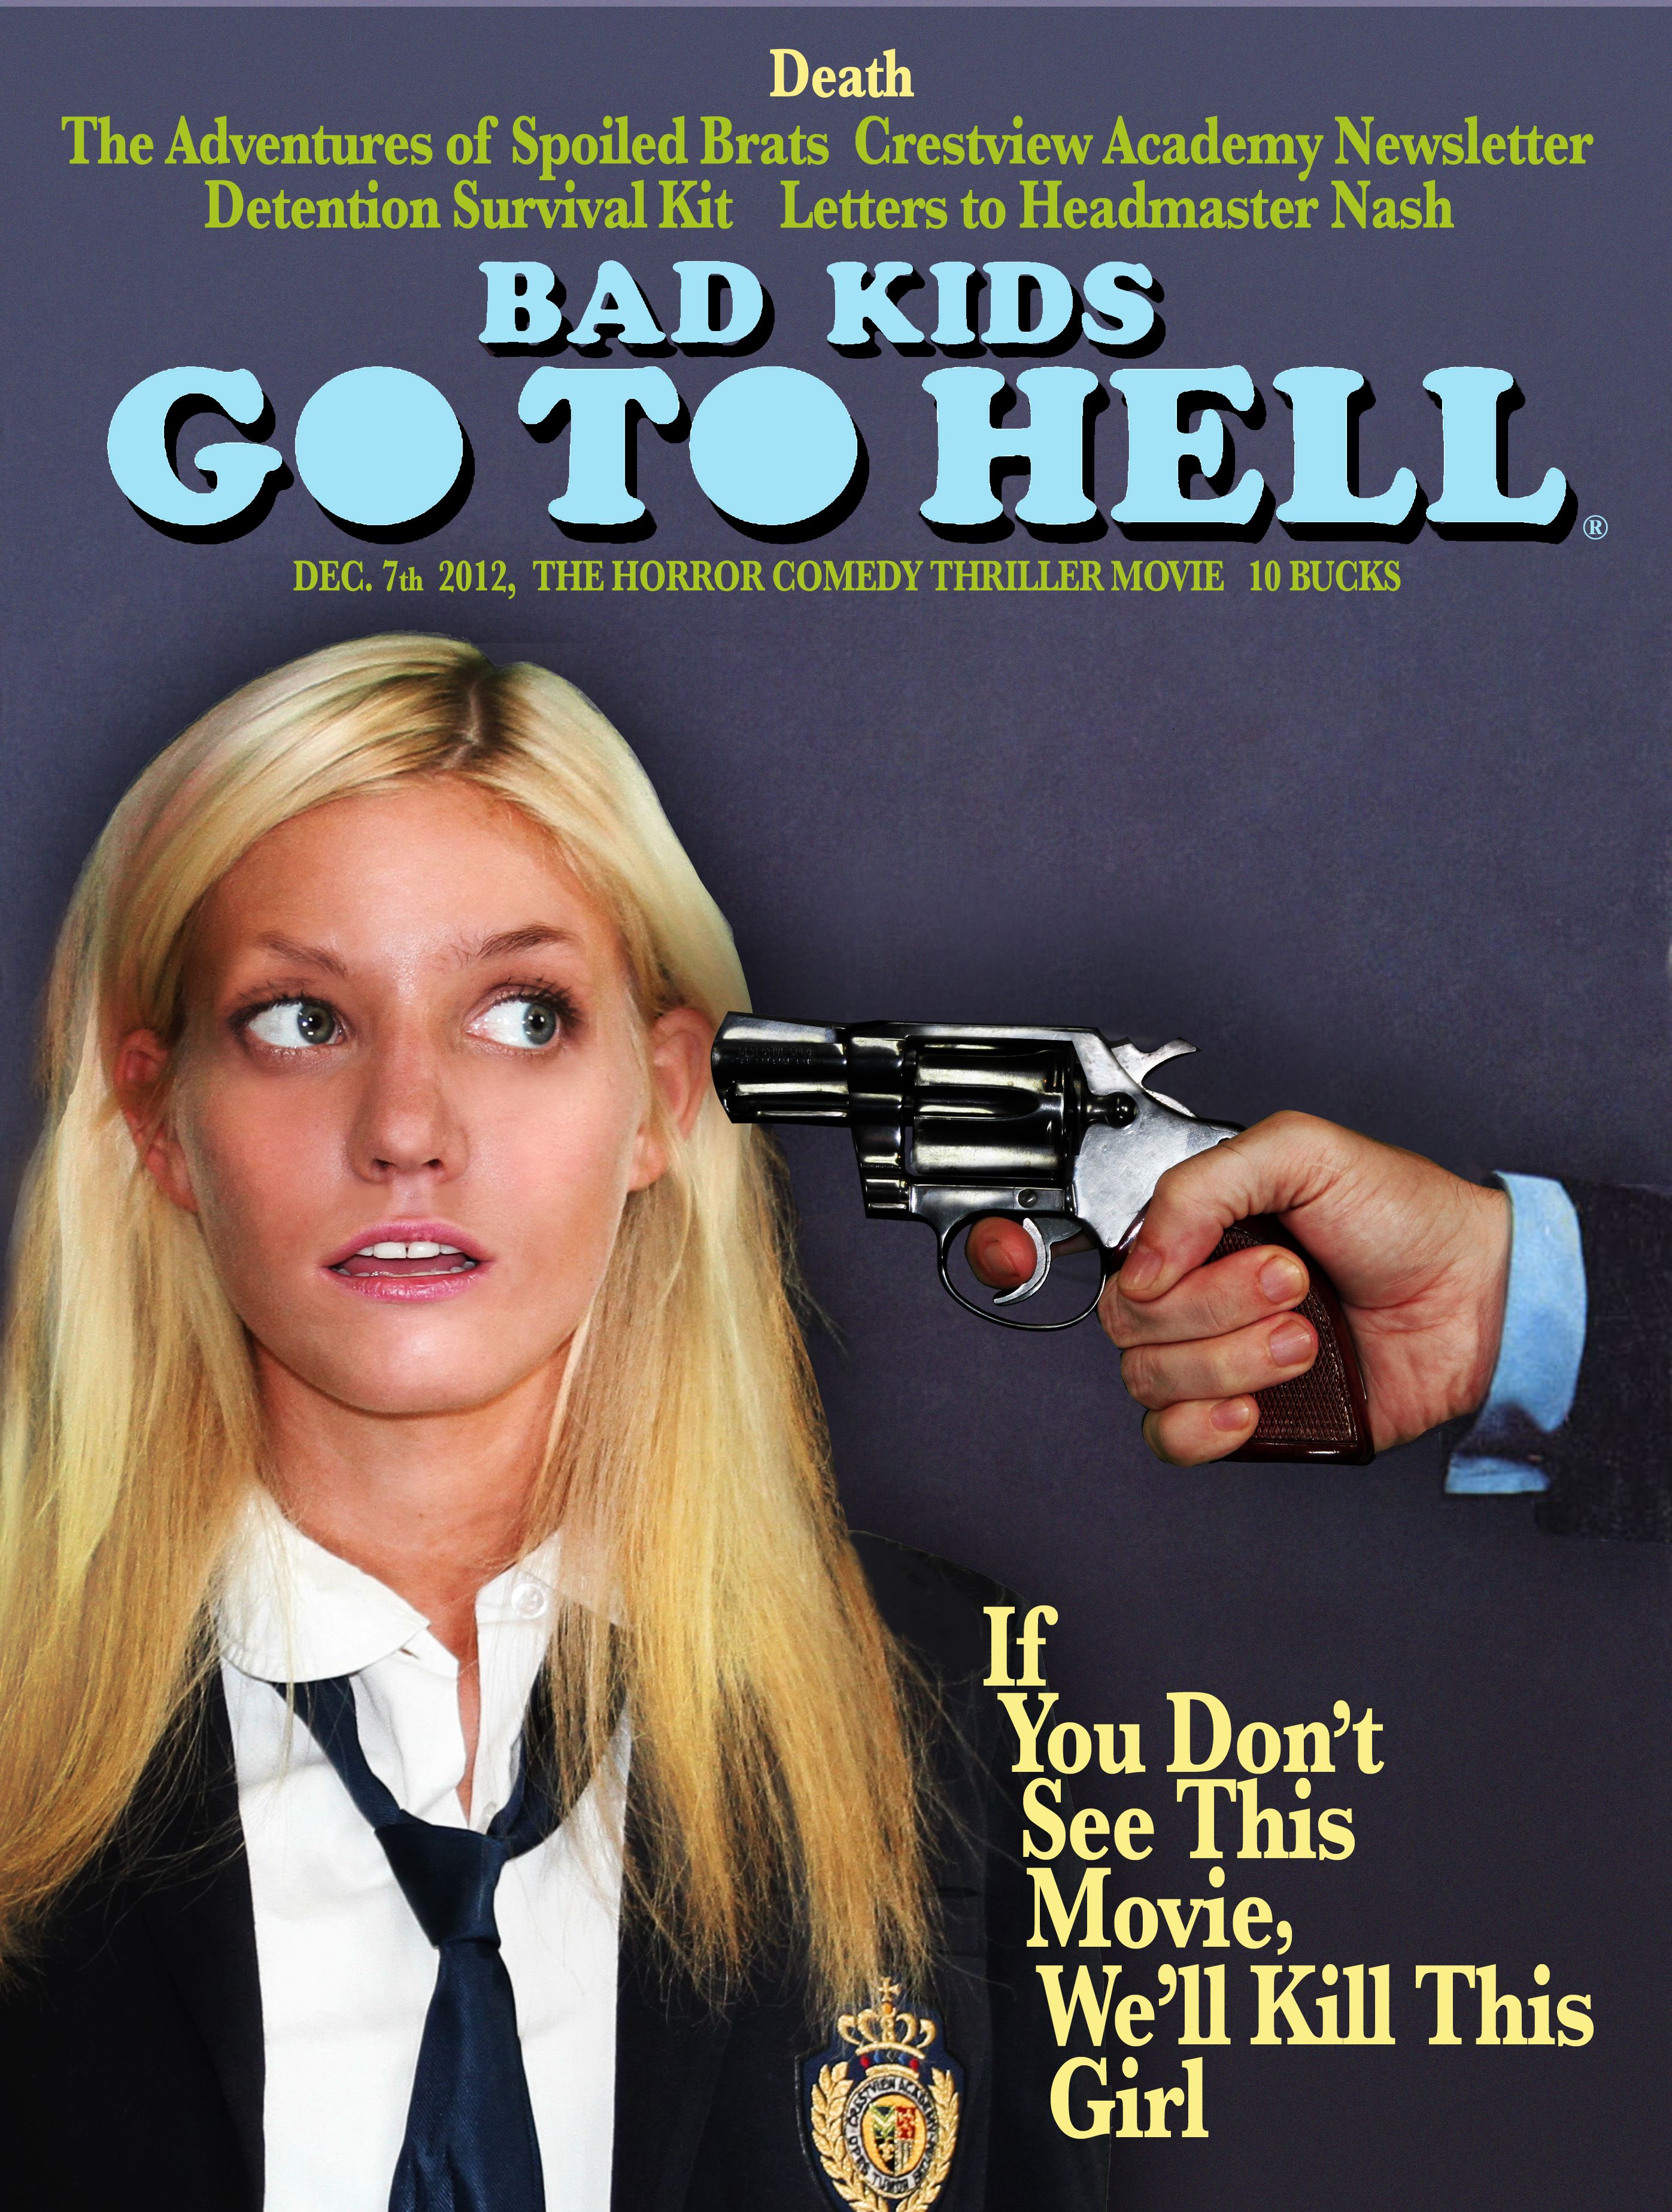 Bad Kids Go To Hell National Lampoon Parody Poster 2